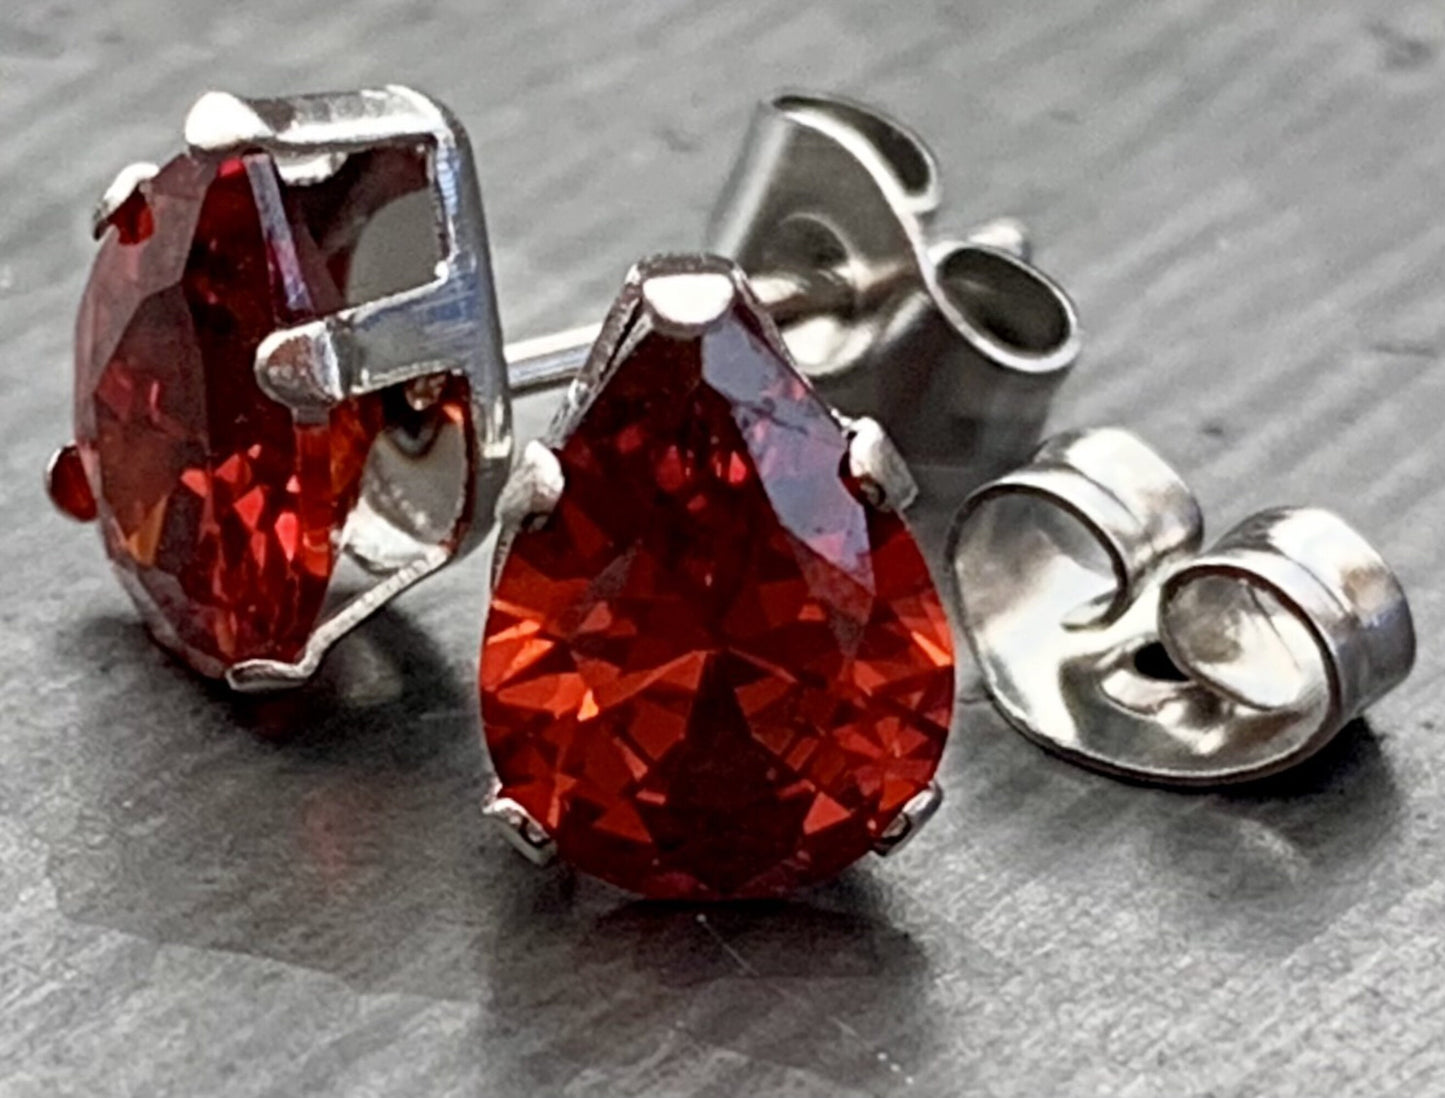 PAIR of Stunning Hypoallergenic Red CZ Gem Teardrop Stud Earrings - 3mm, 4mm, 5mm, 6mm & 7mm Gem Size Available!